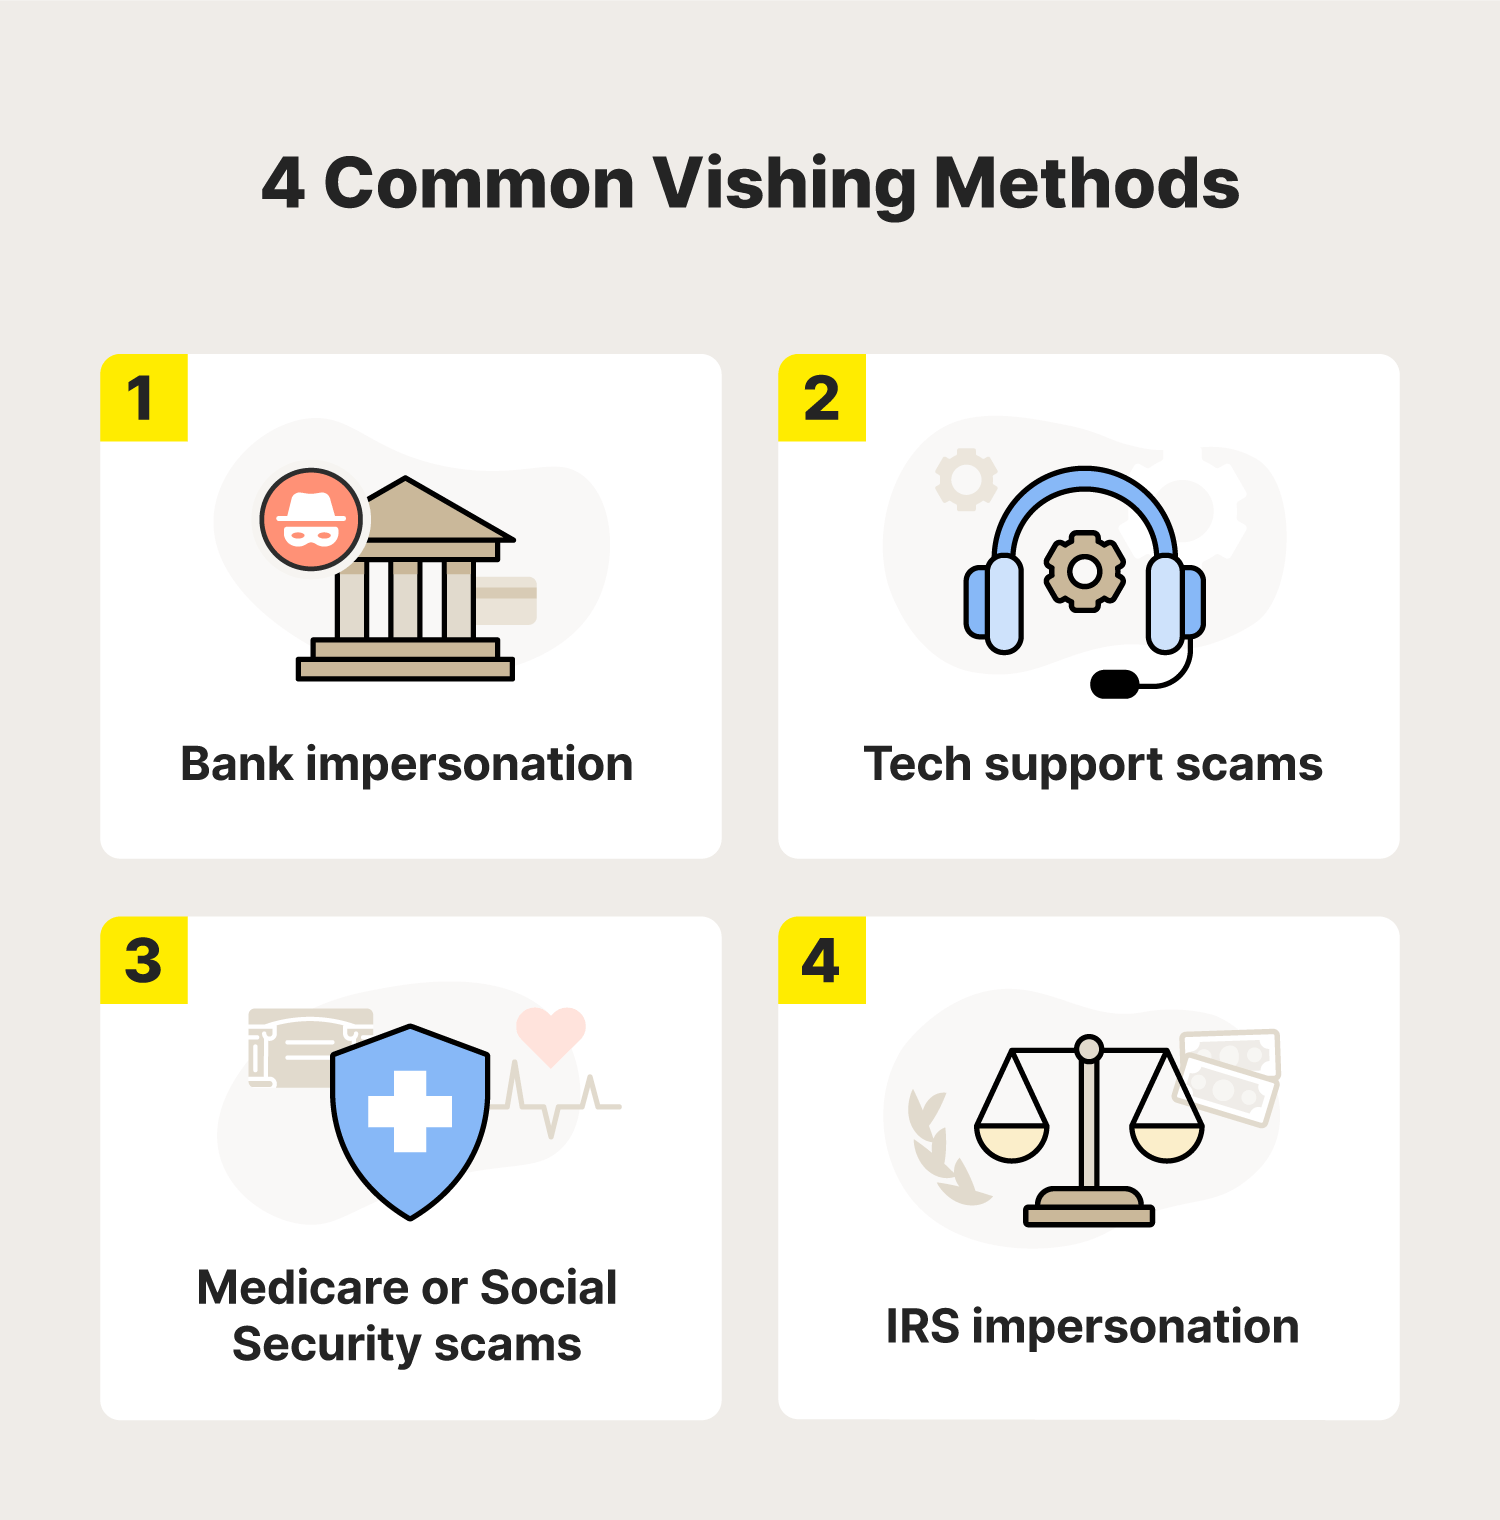 A few common vishing tactics include bank impersonation, tech support scams, Medicare or Social Security scams, and IRS impersonation.